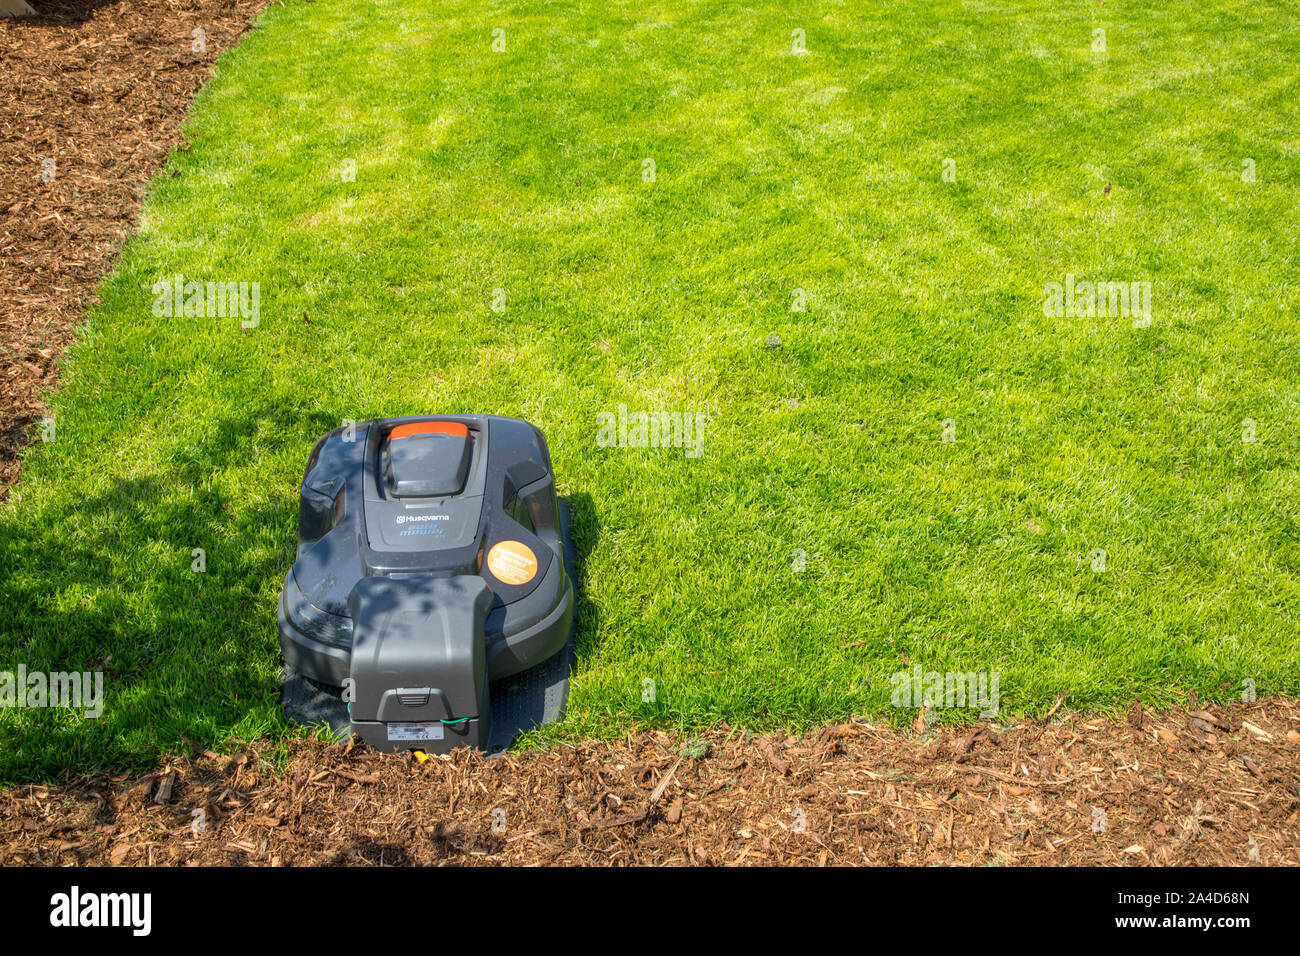 Lawn mower robot, from Husqvarna, automatically mows the lawn, Stock Photo